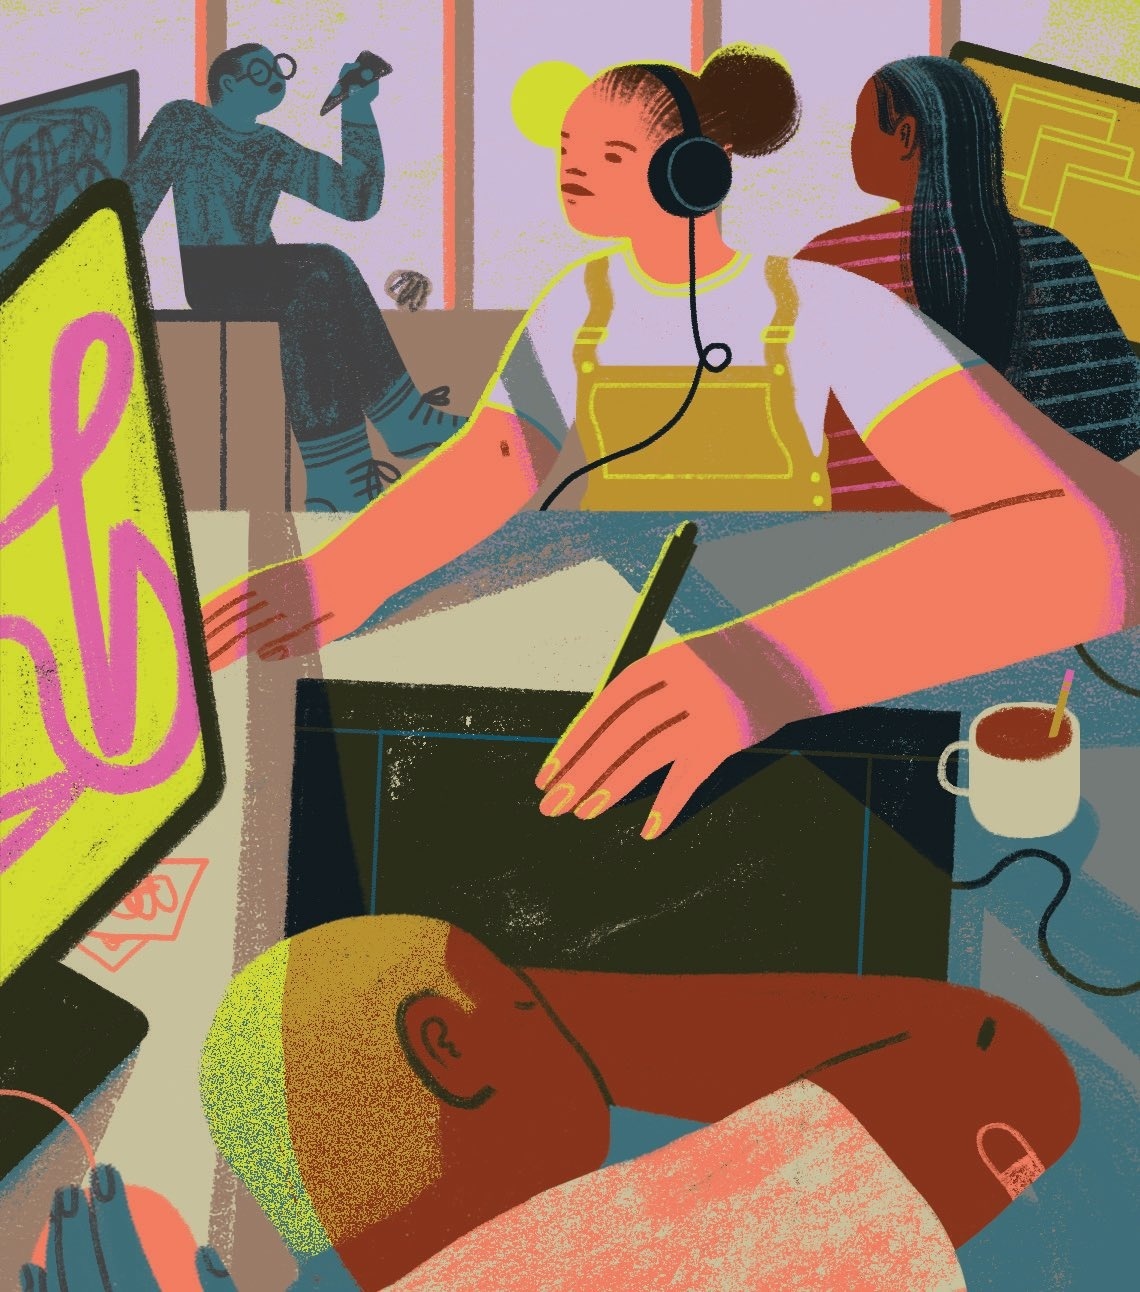 Digital illustration of a student with headphones on, working at their studio desk, with other students around them, eating pizza and working.